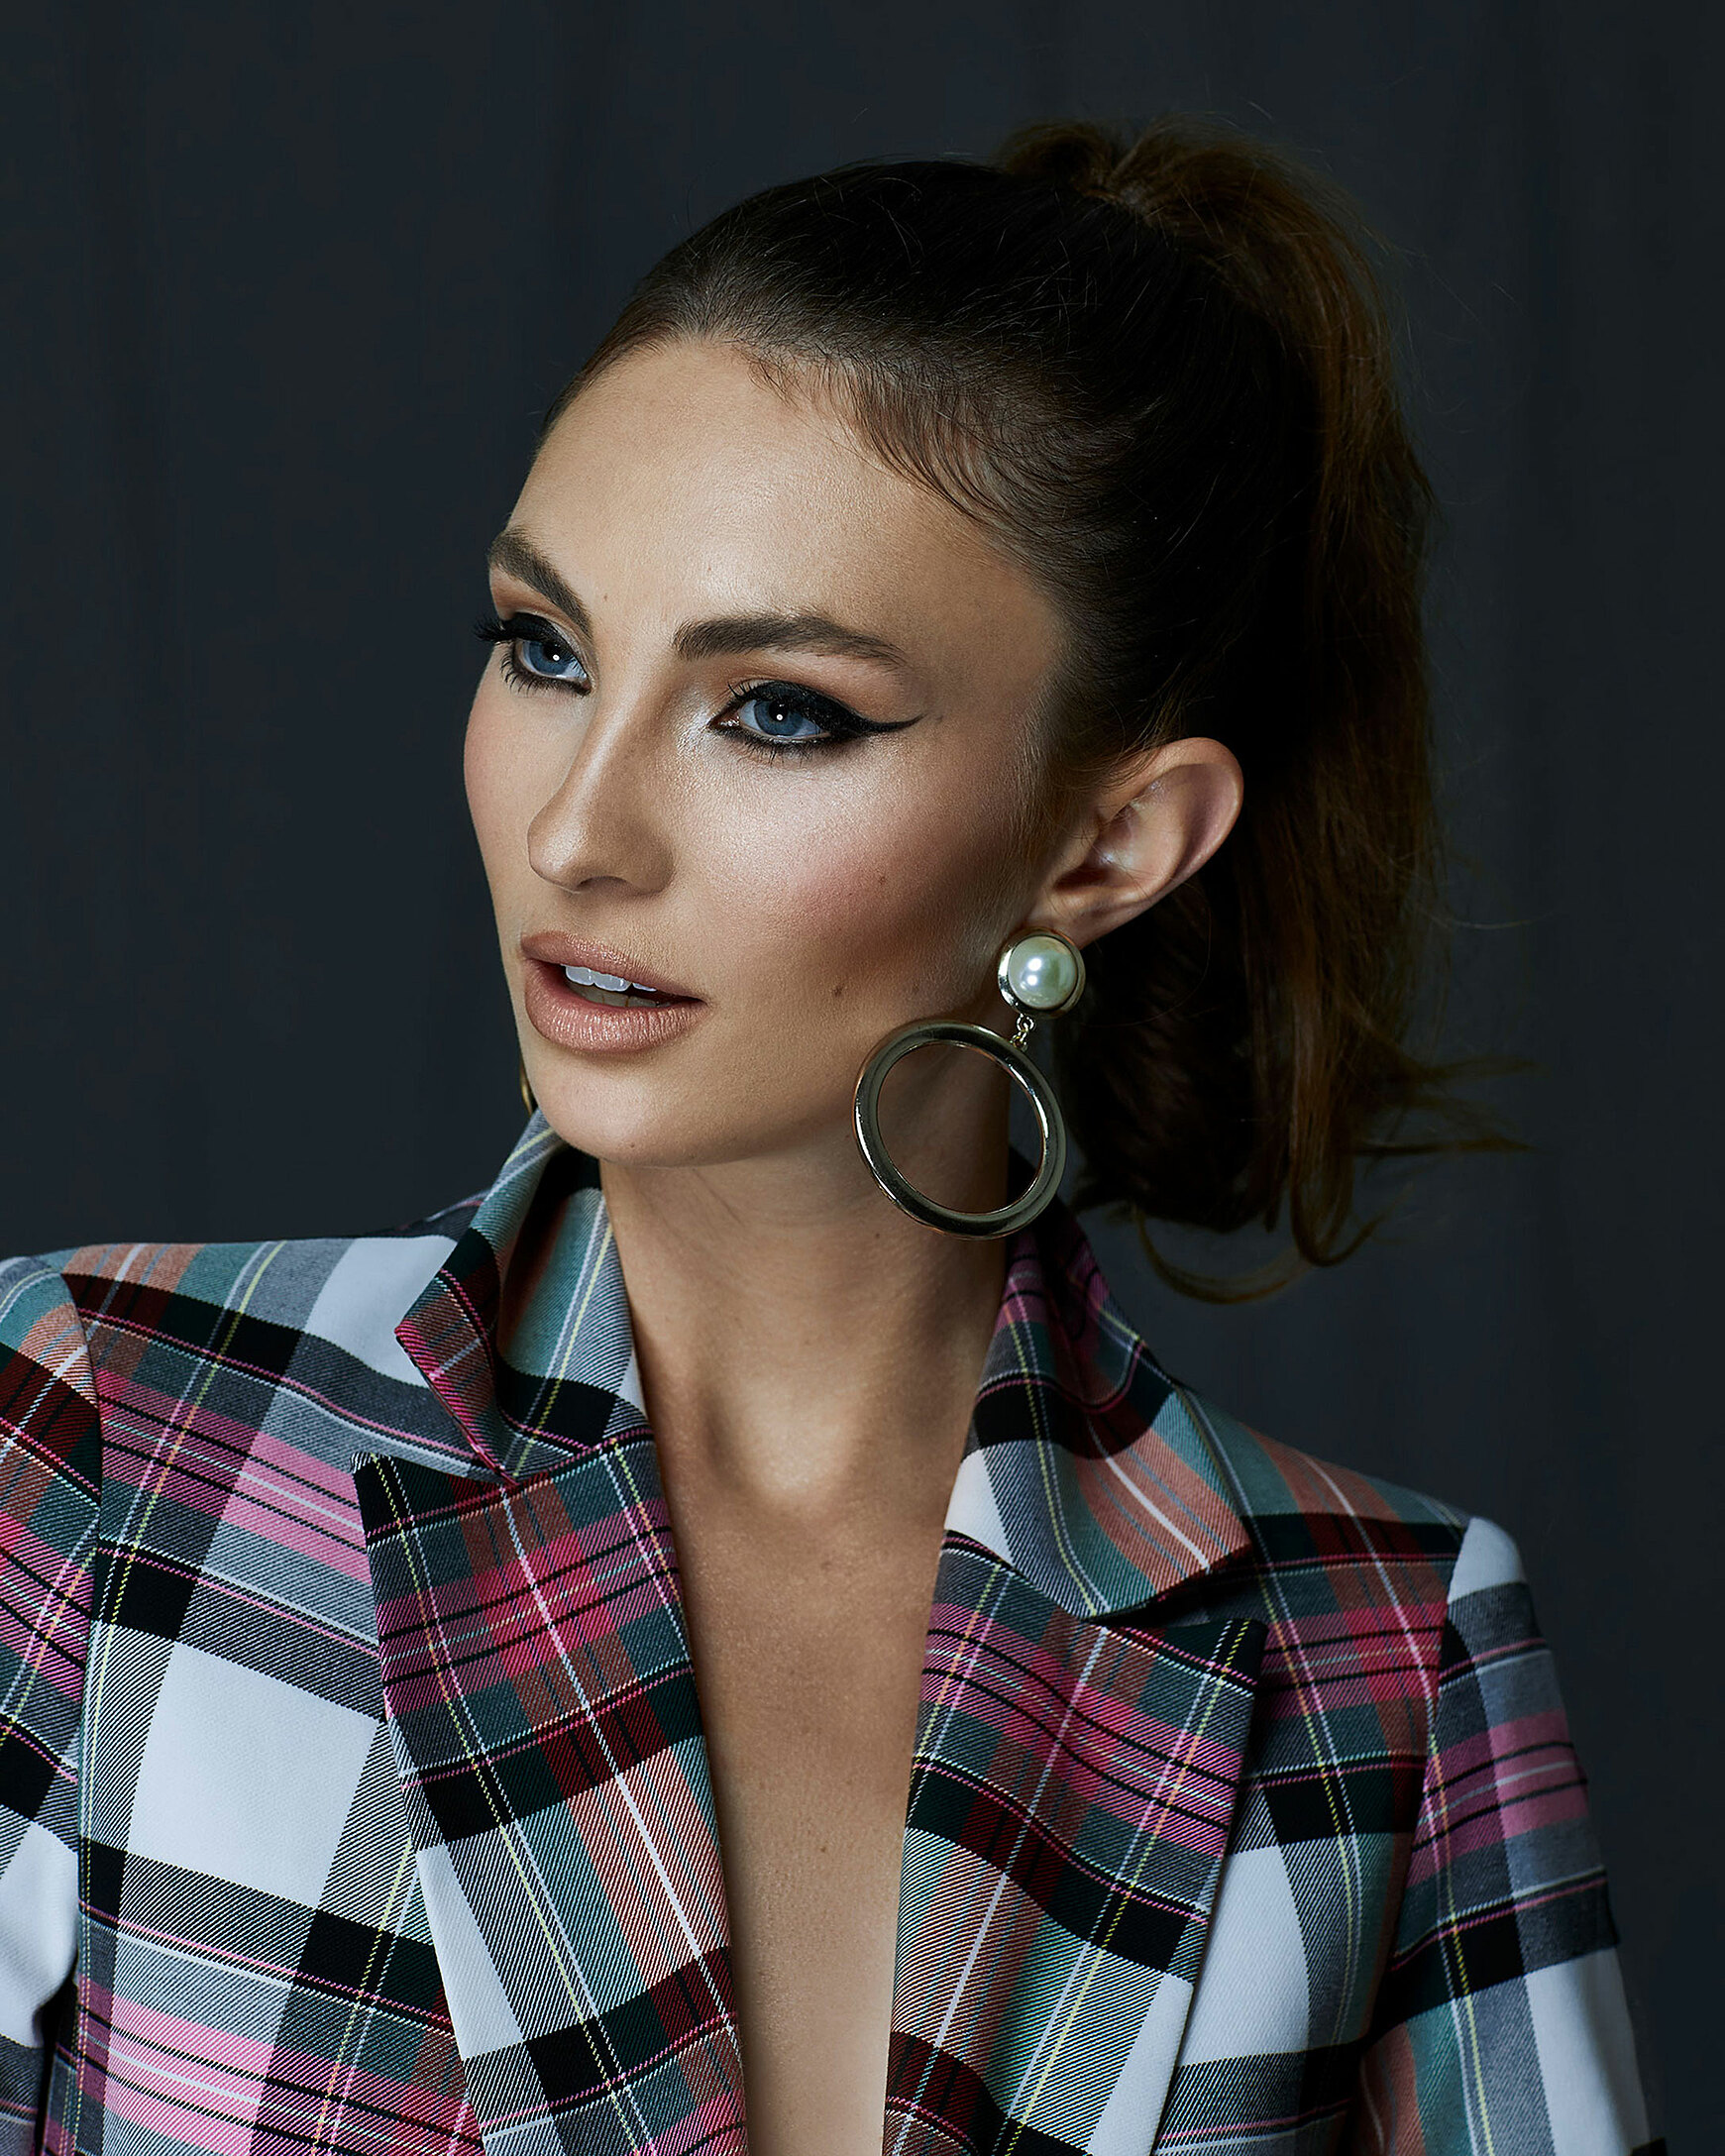 A portrait of a model with brown hair and a ponytail who wears an eyeliner and a blazer with big check pattern